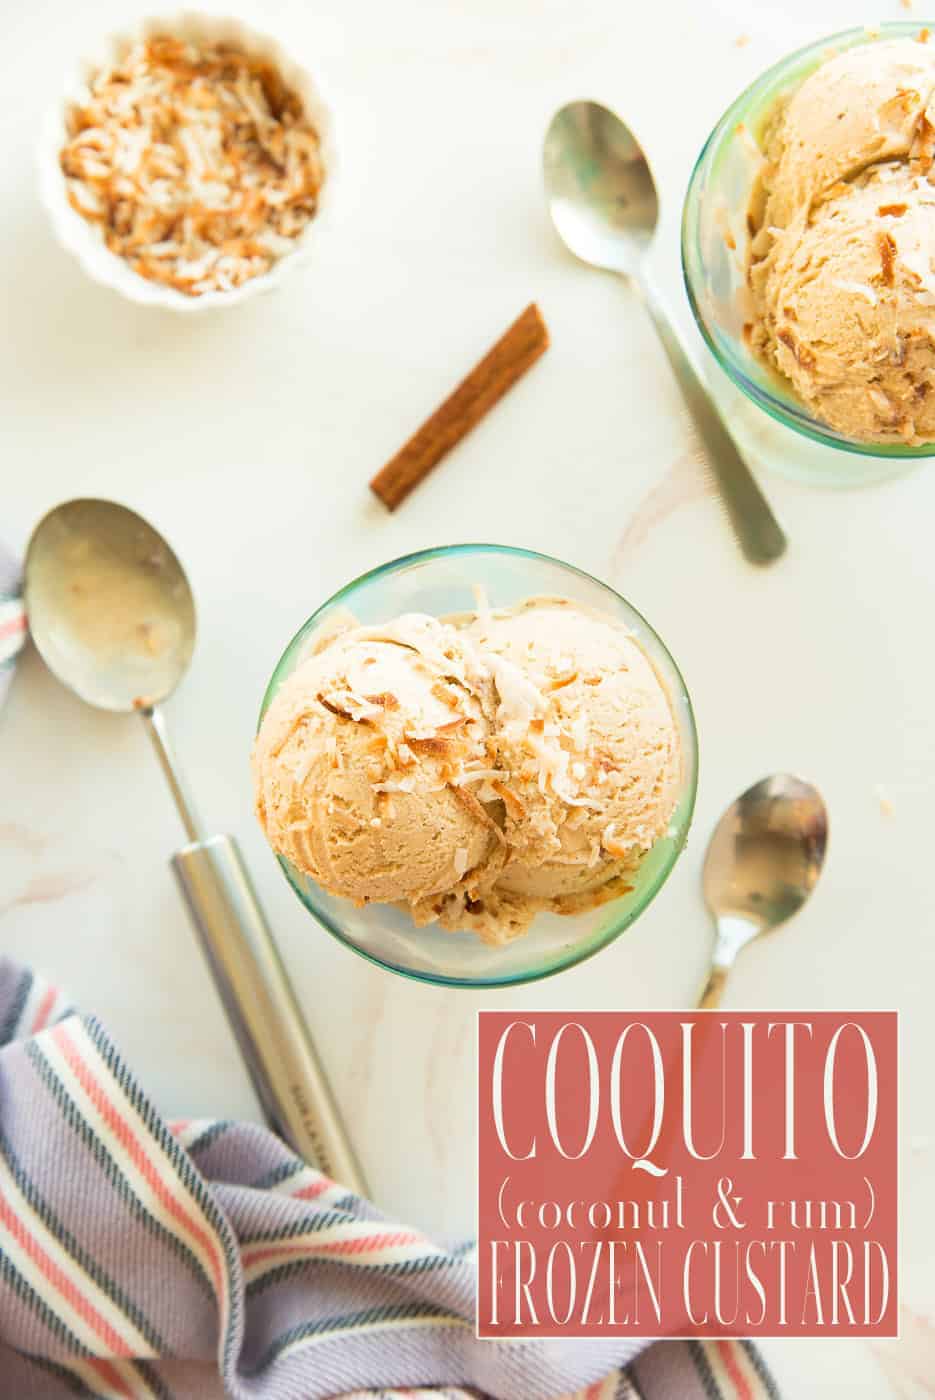 Coquito Frozen Custard makes the popular Puerto Rican holiday rum and coconut cocktail kid- and summer-friendlier. Made with fresh coconut milk, warm cinnamon, and nutty coconut flakes, your entire family is going to love this new twist on a classic. #frozencustard #icecream #coconut #coquito #recetadecoquito #recetaPuertorriqueña #PuertoRicanrecipe #rum #bacardirum #cocolopez #coquitodessert #coquitoicecream #coconuticecream via @ediblesense